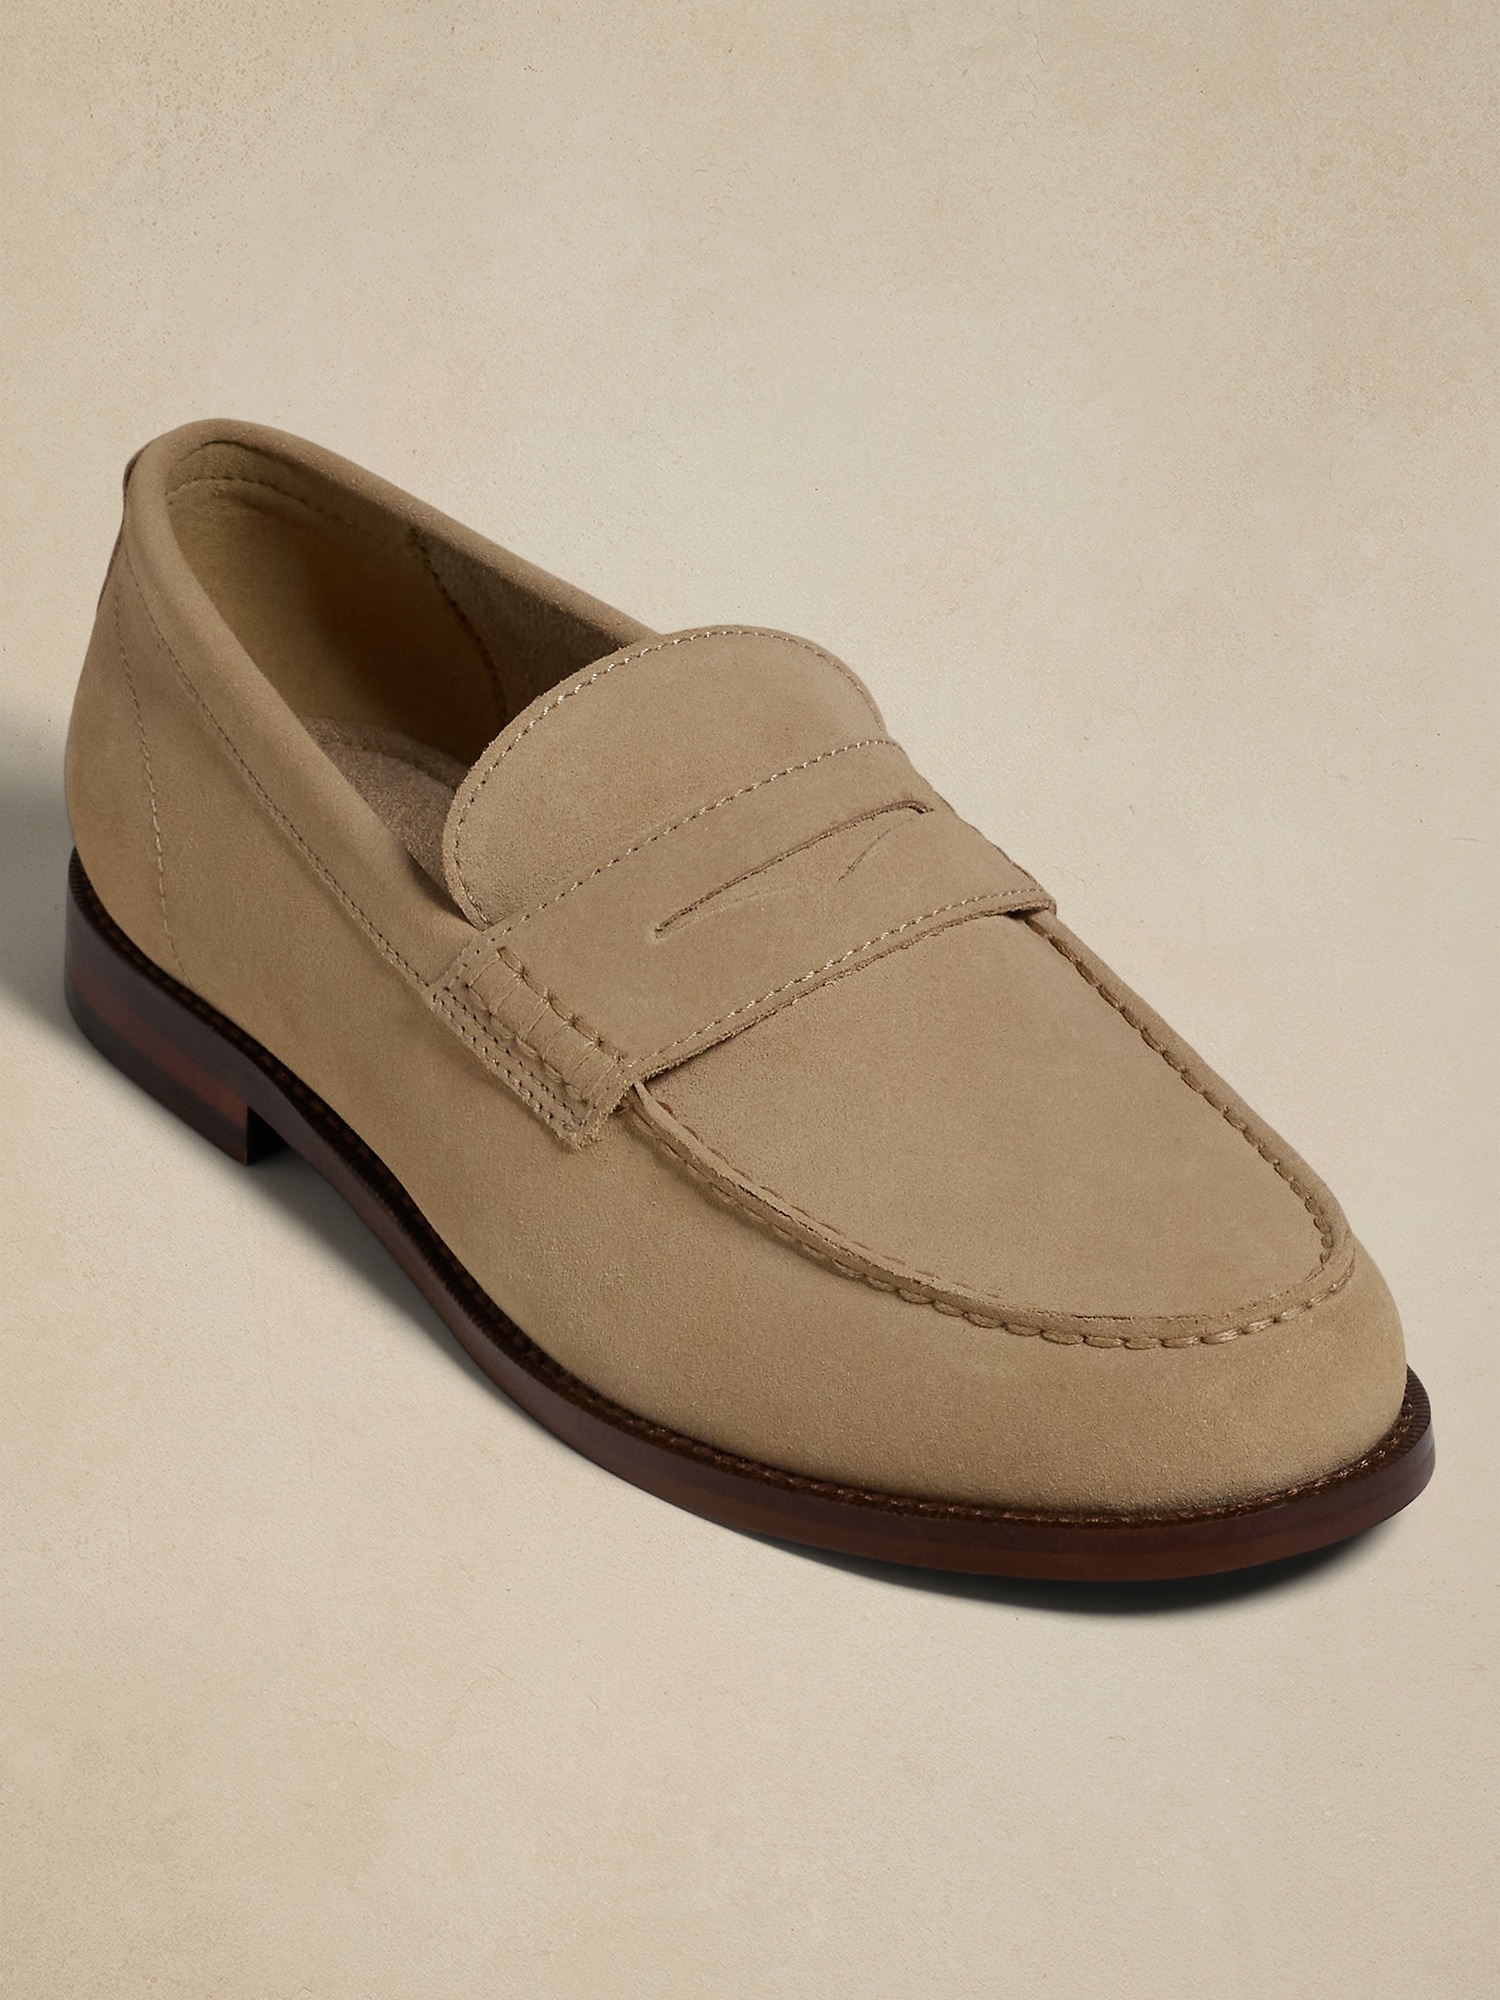 Classic Suede Penny Loafer